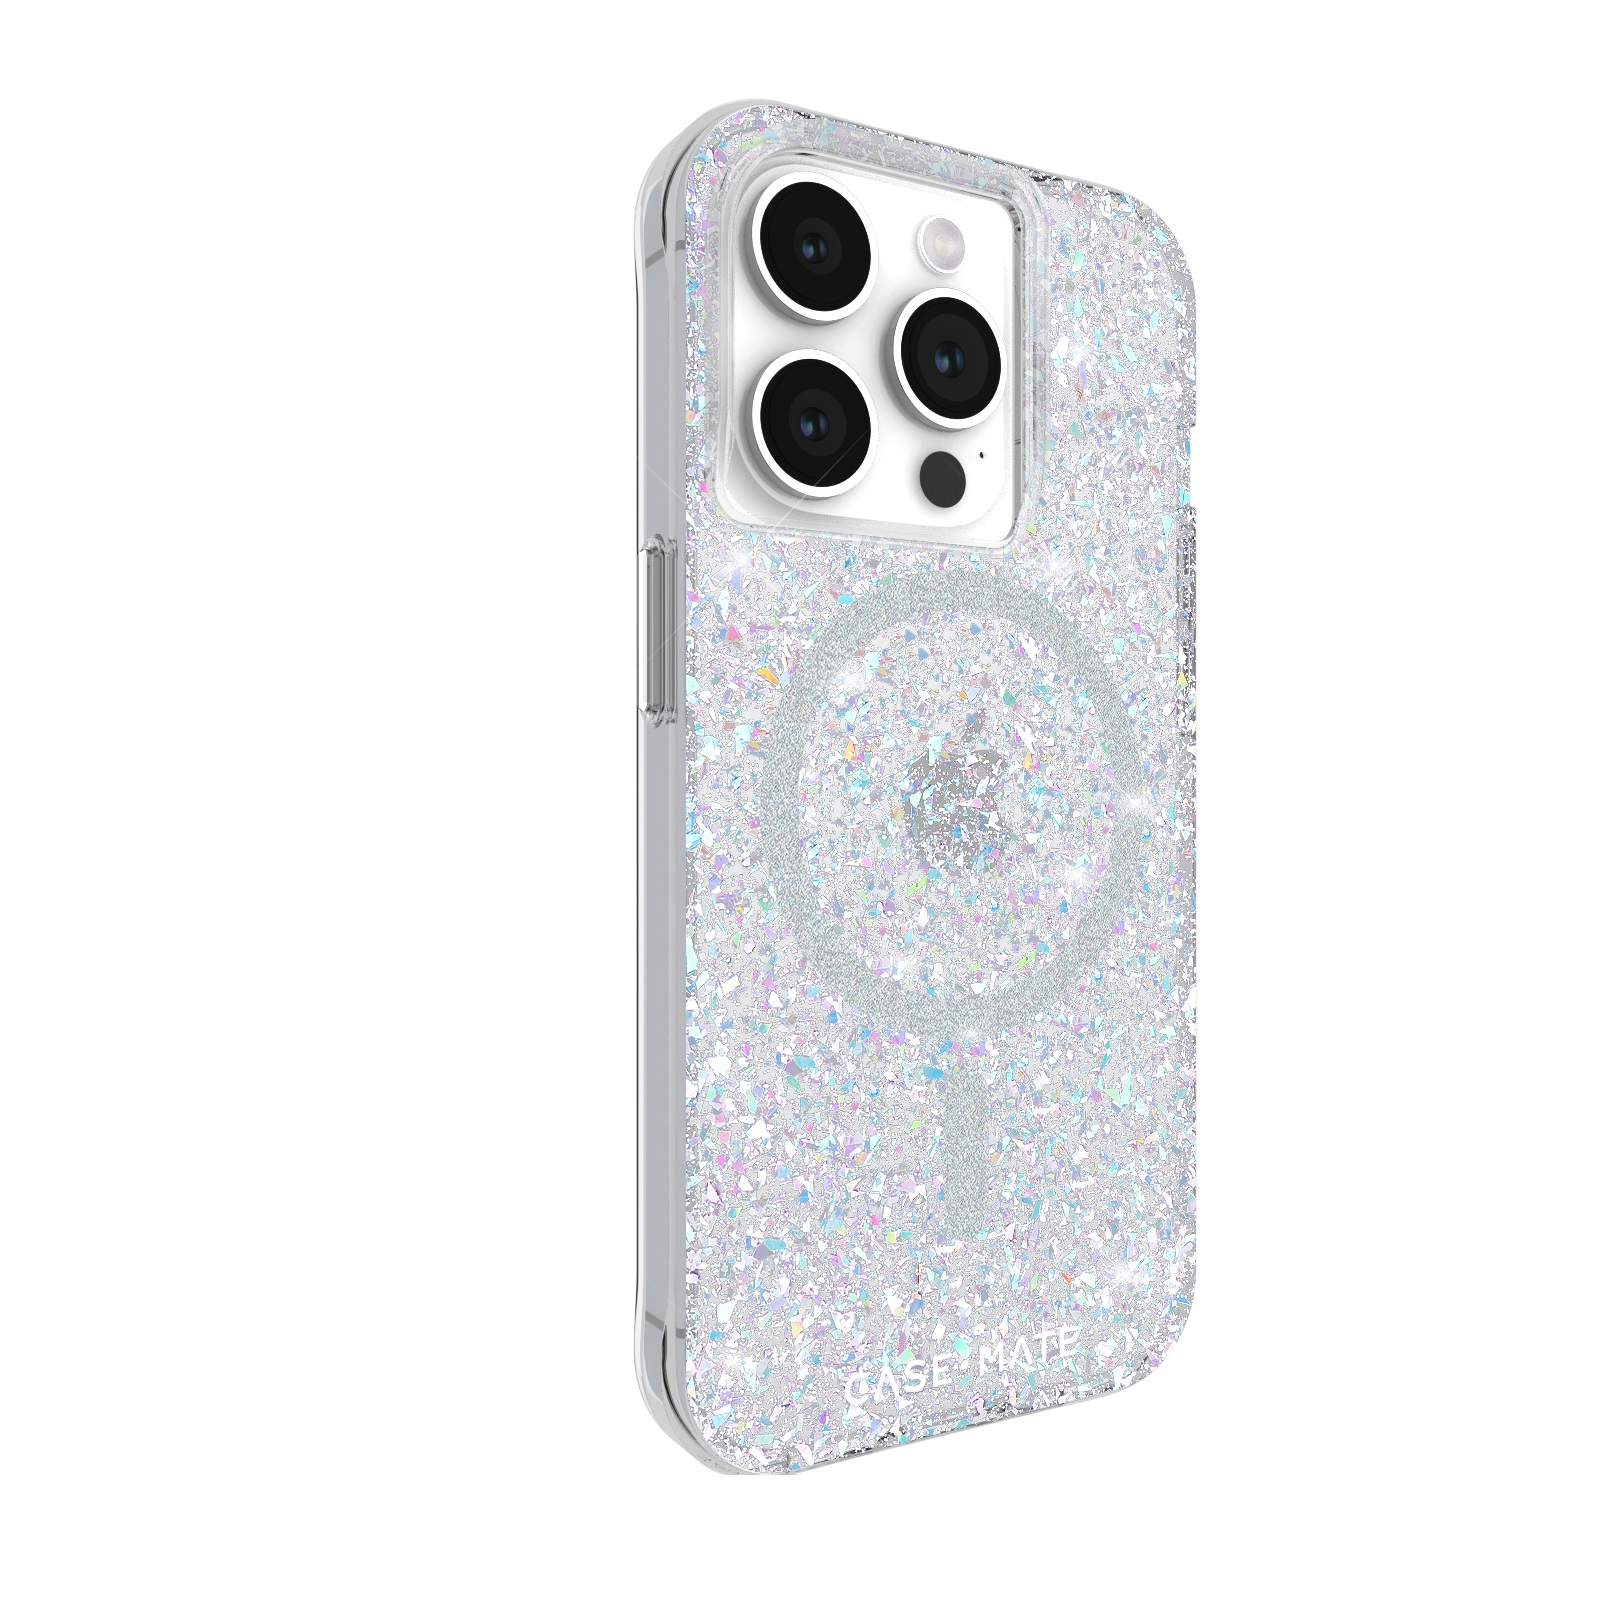 CASE-MATE Pro, Glitzer Apple, 15 iPhone Twinkle, Backcover,